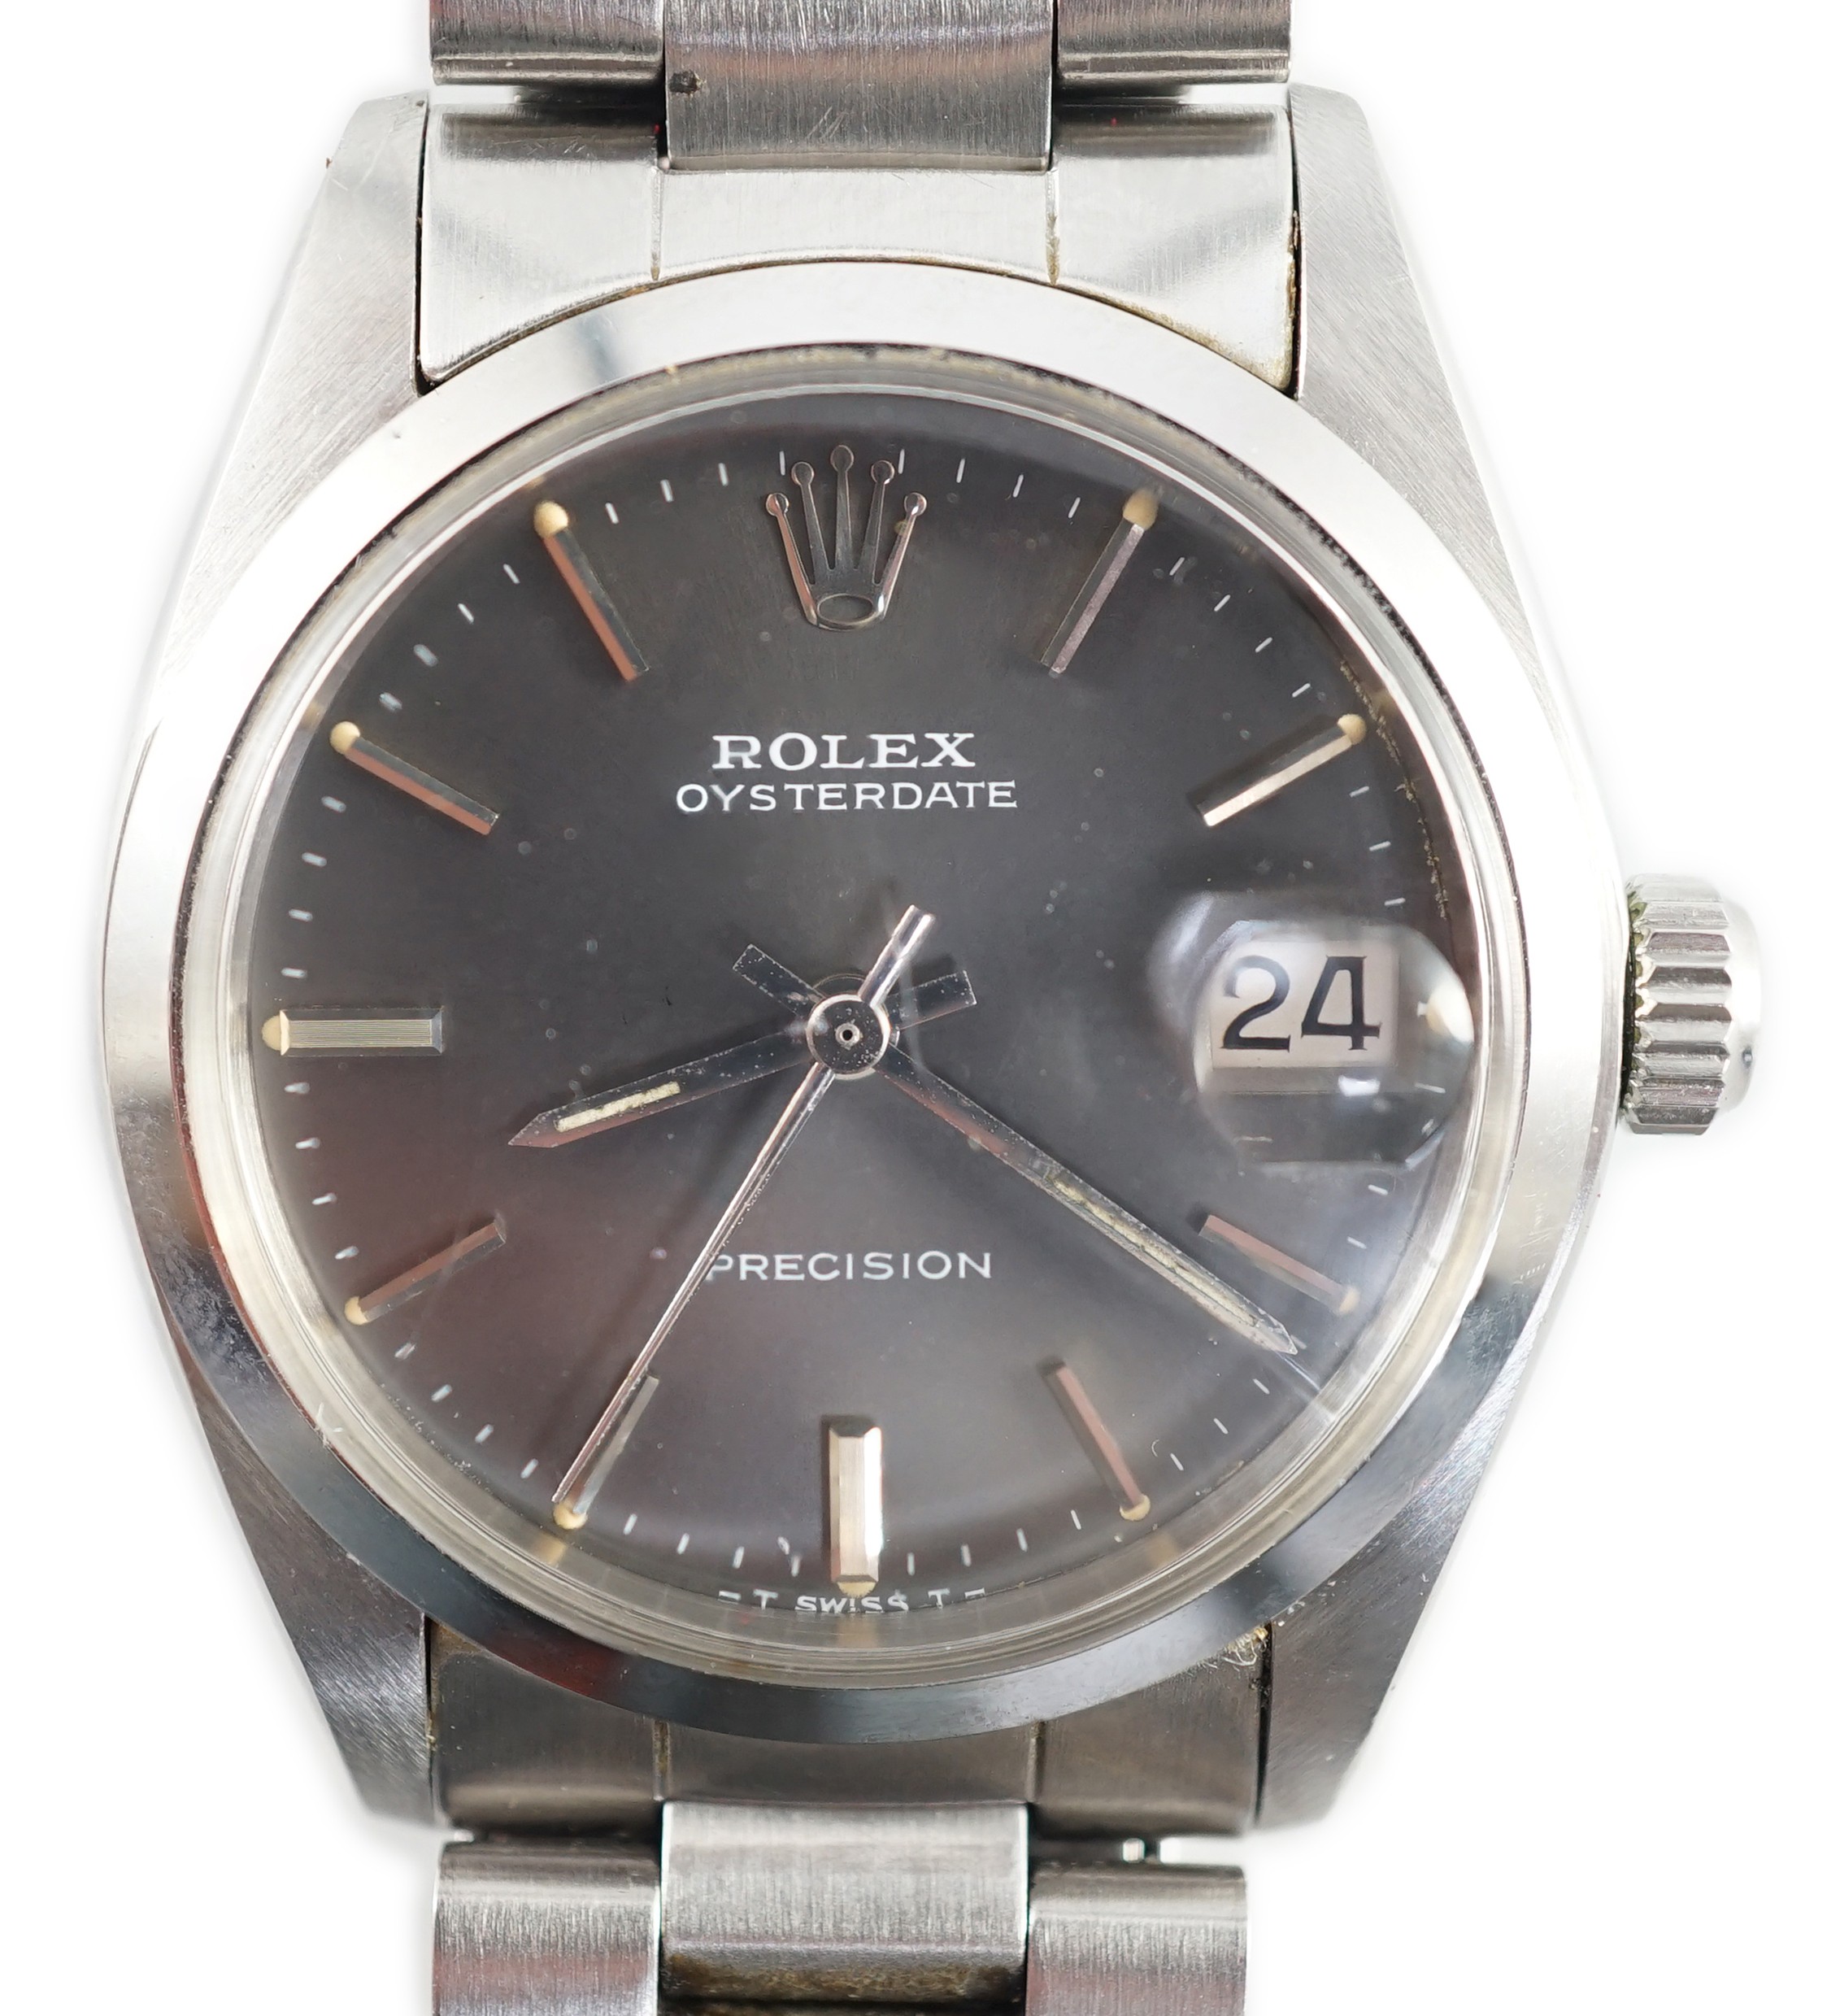 A 1980's mid-size stainless steel Rolex Oysterdate Precision manual wind wrist watch, on a stainless